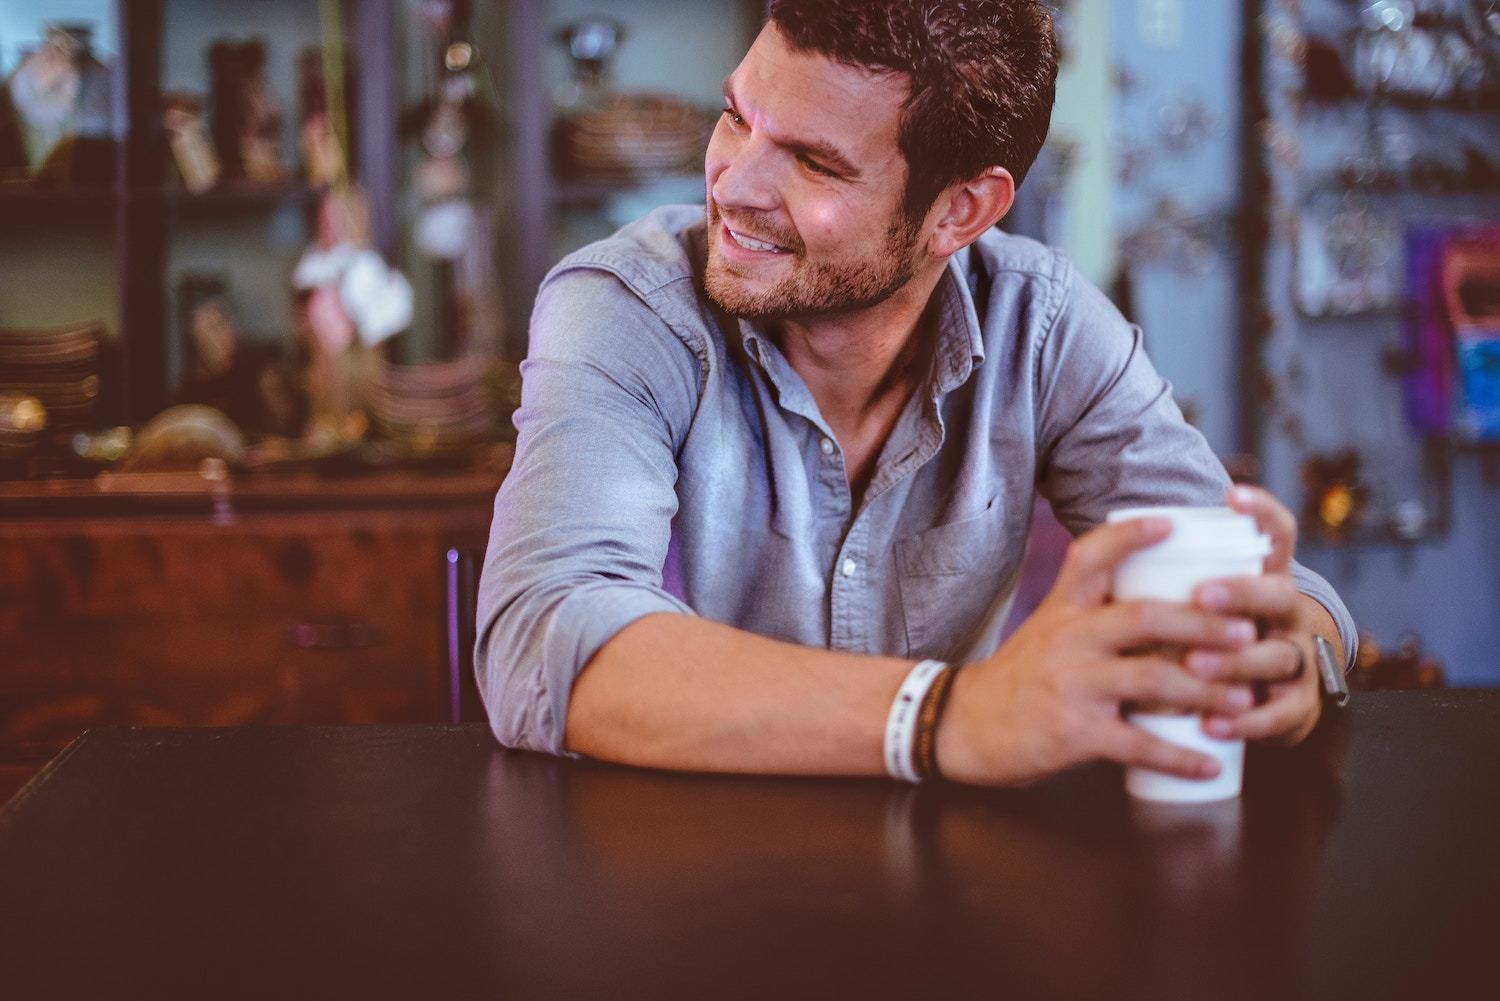 Smiling man with coffee cup